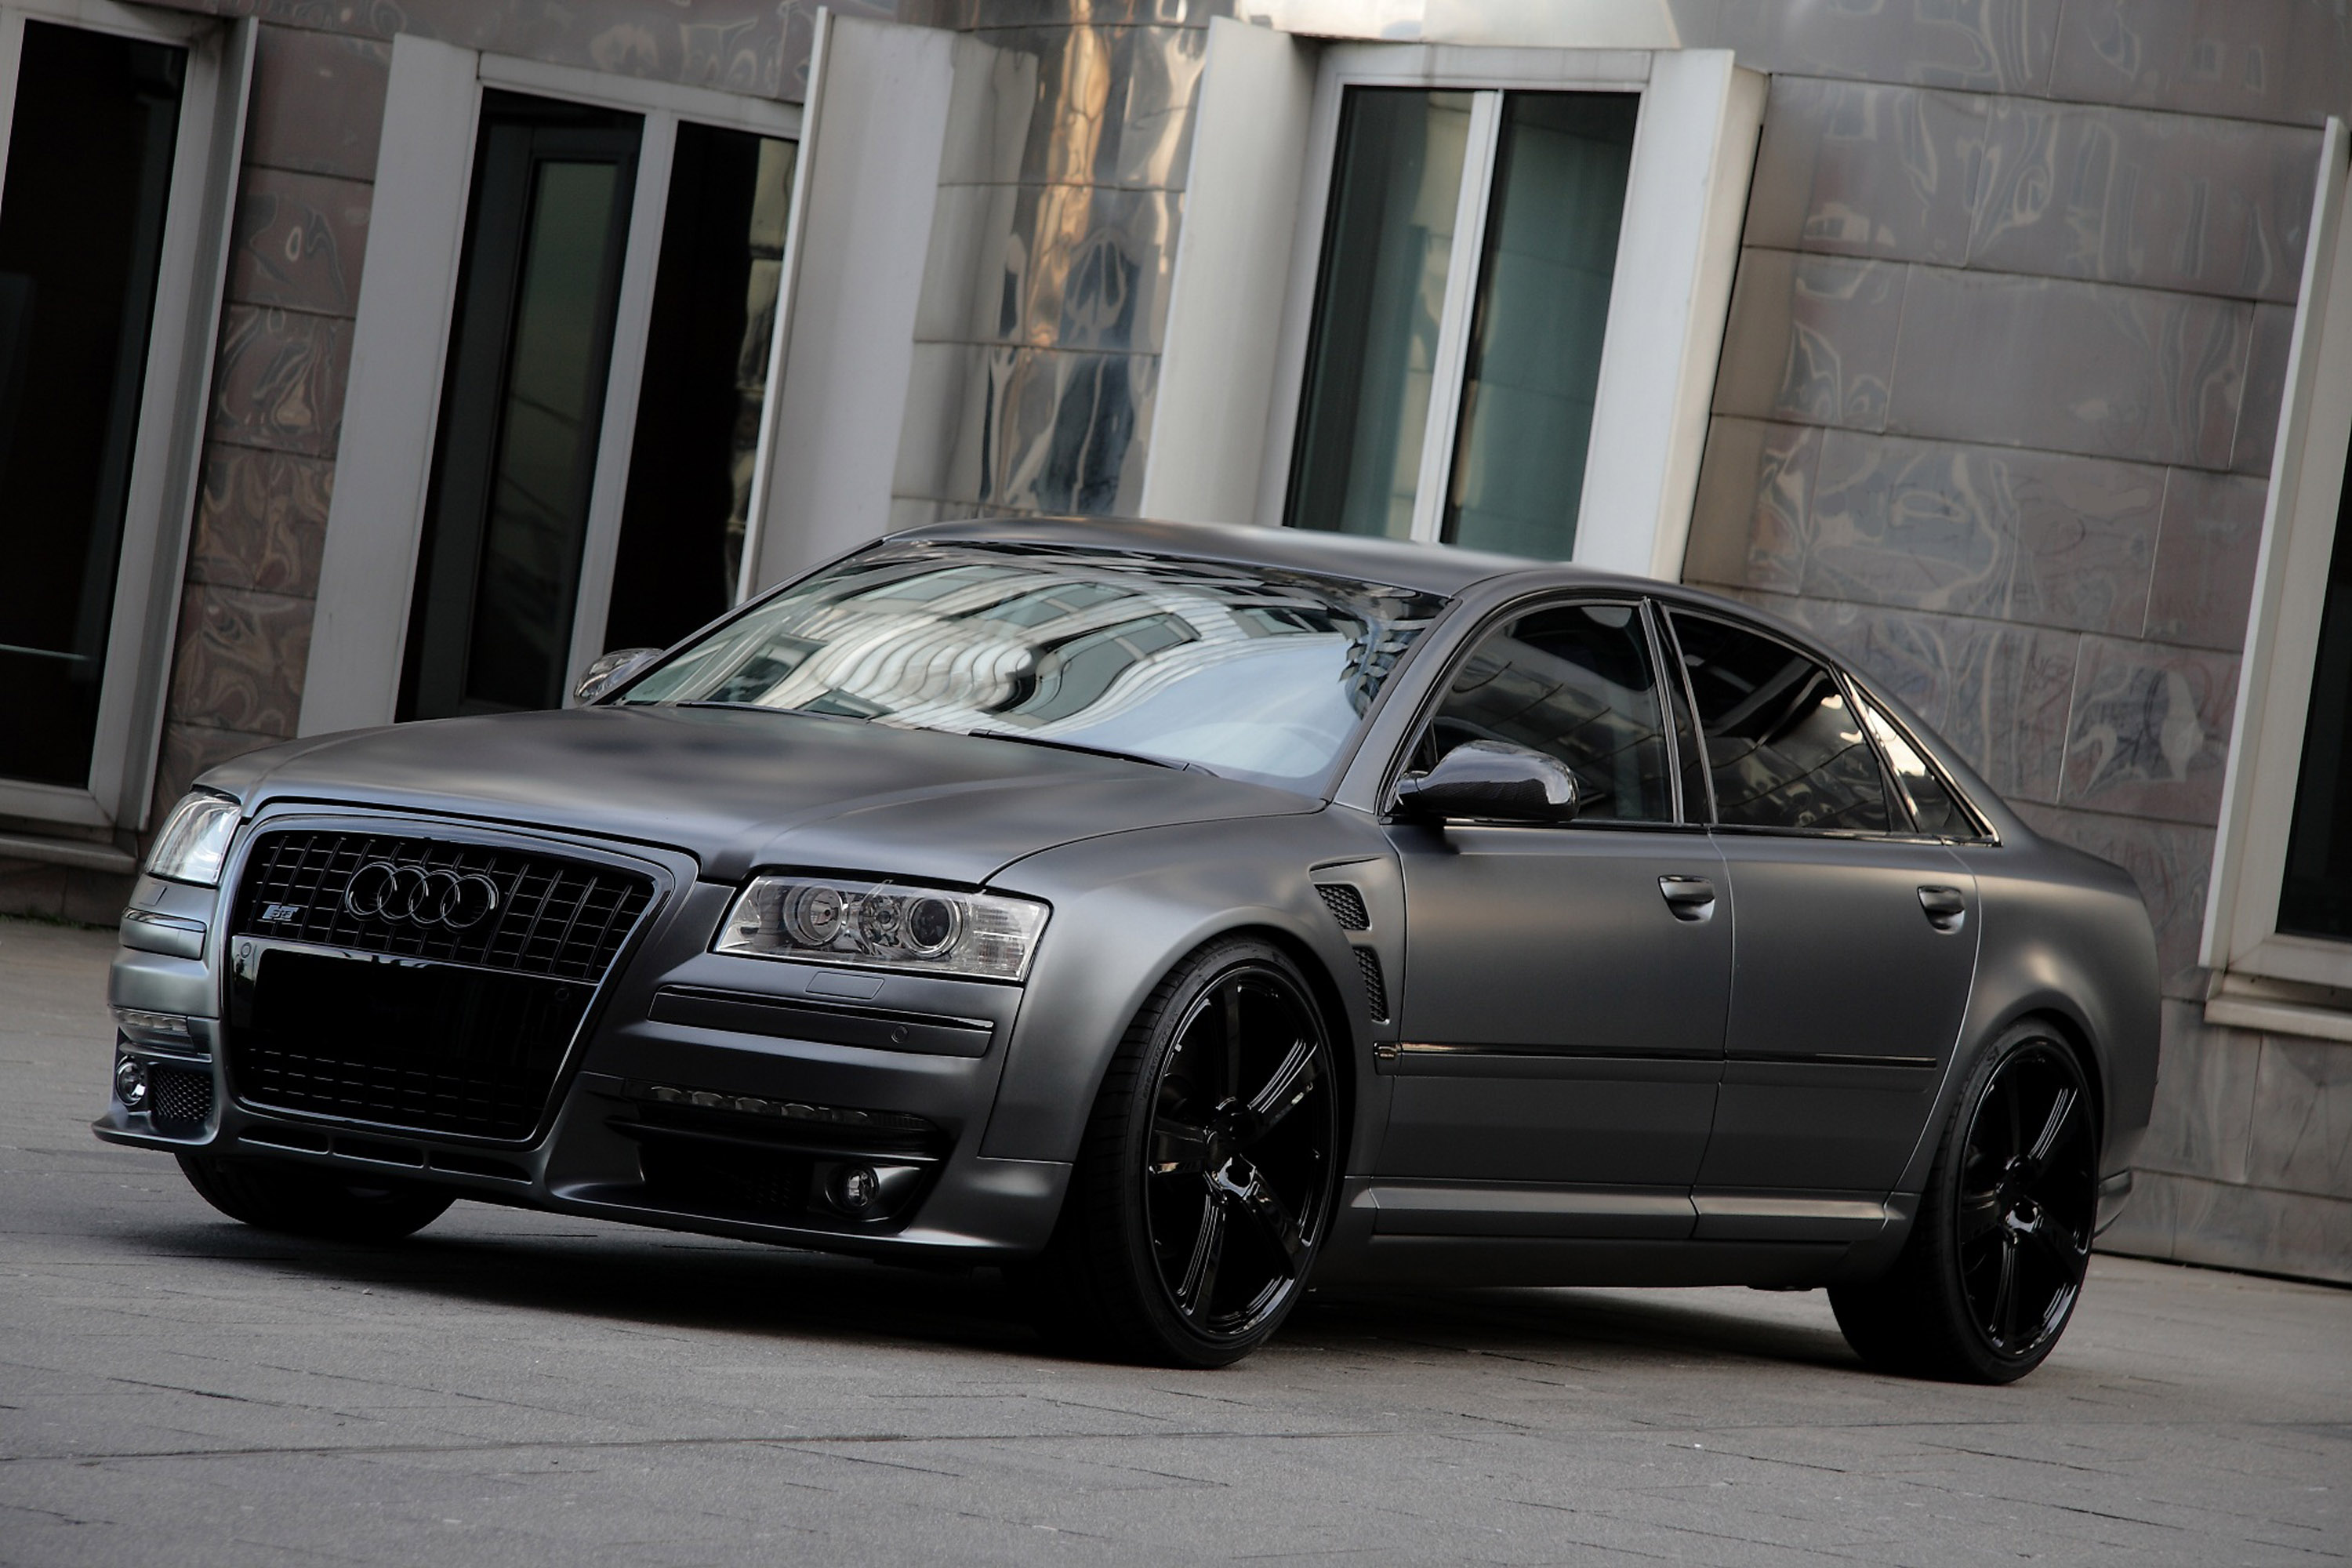 Tuning Audi a8,s8 d3